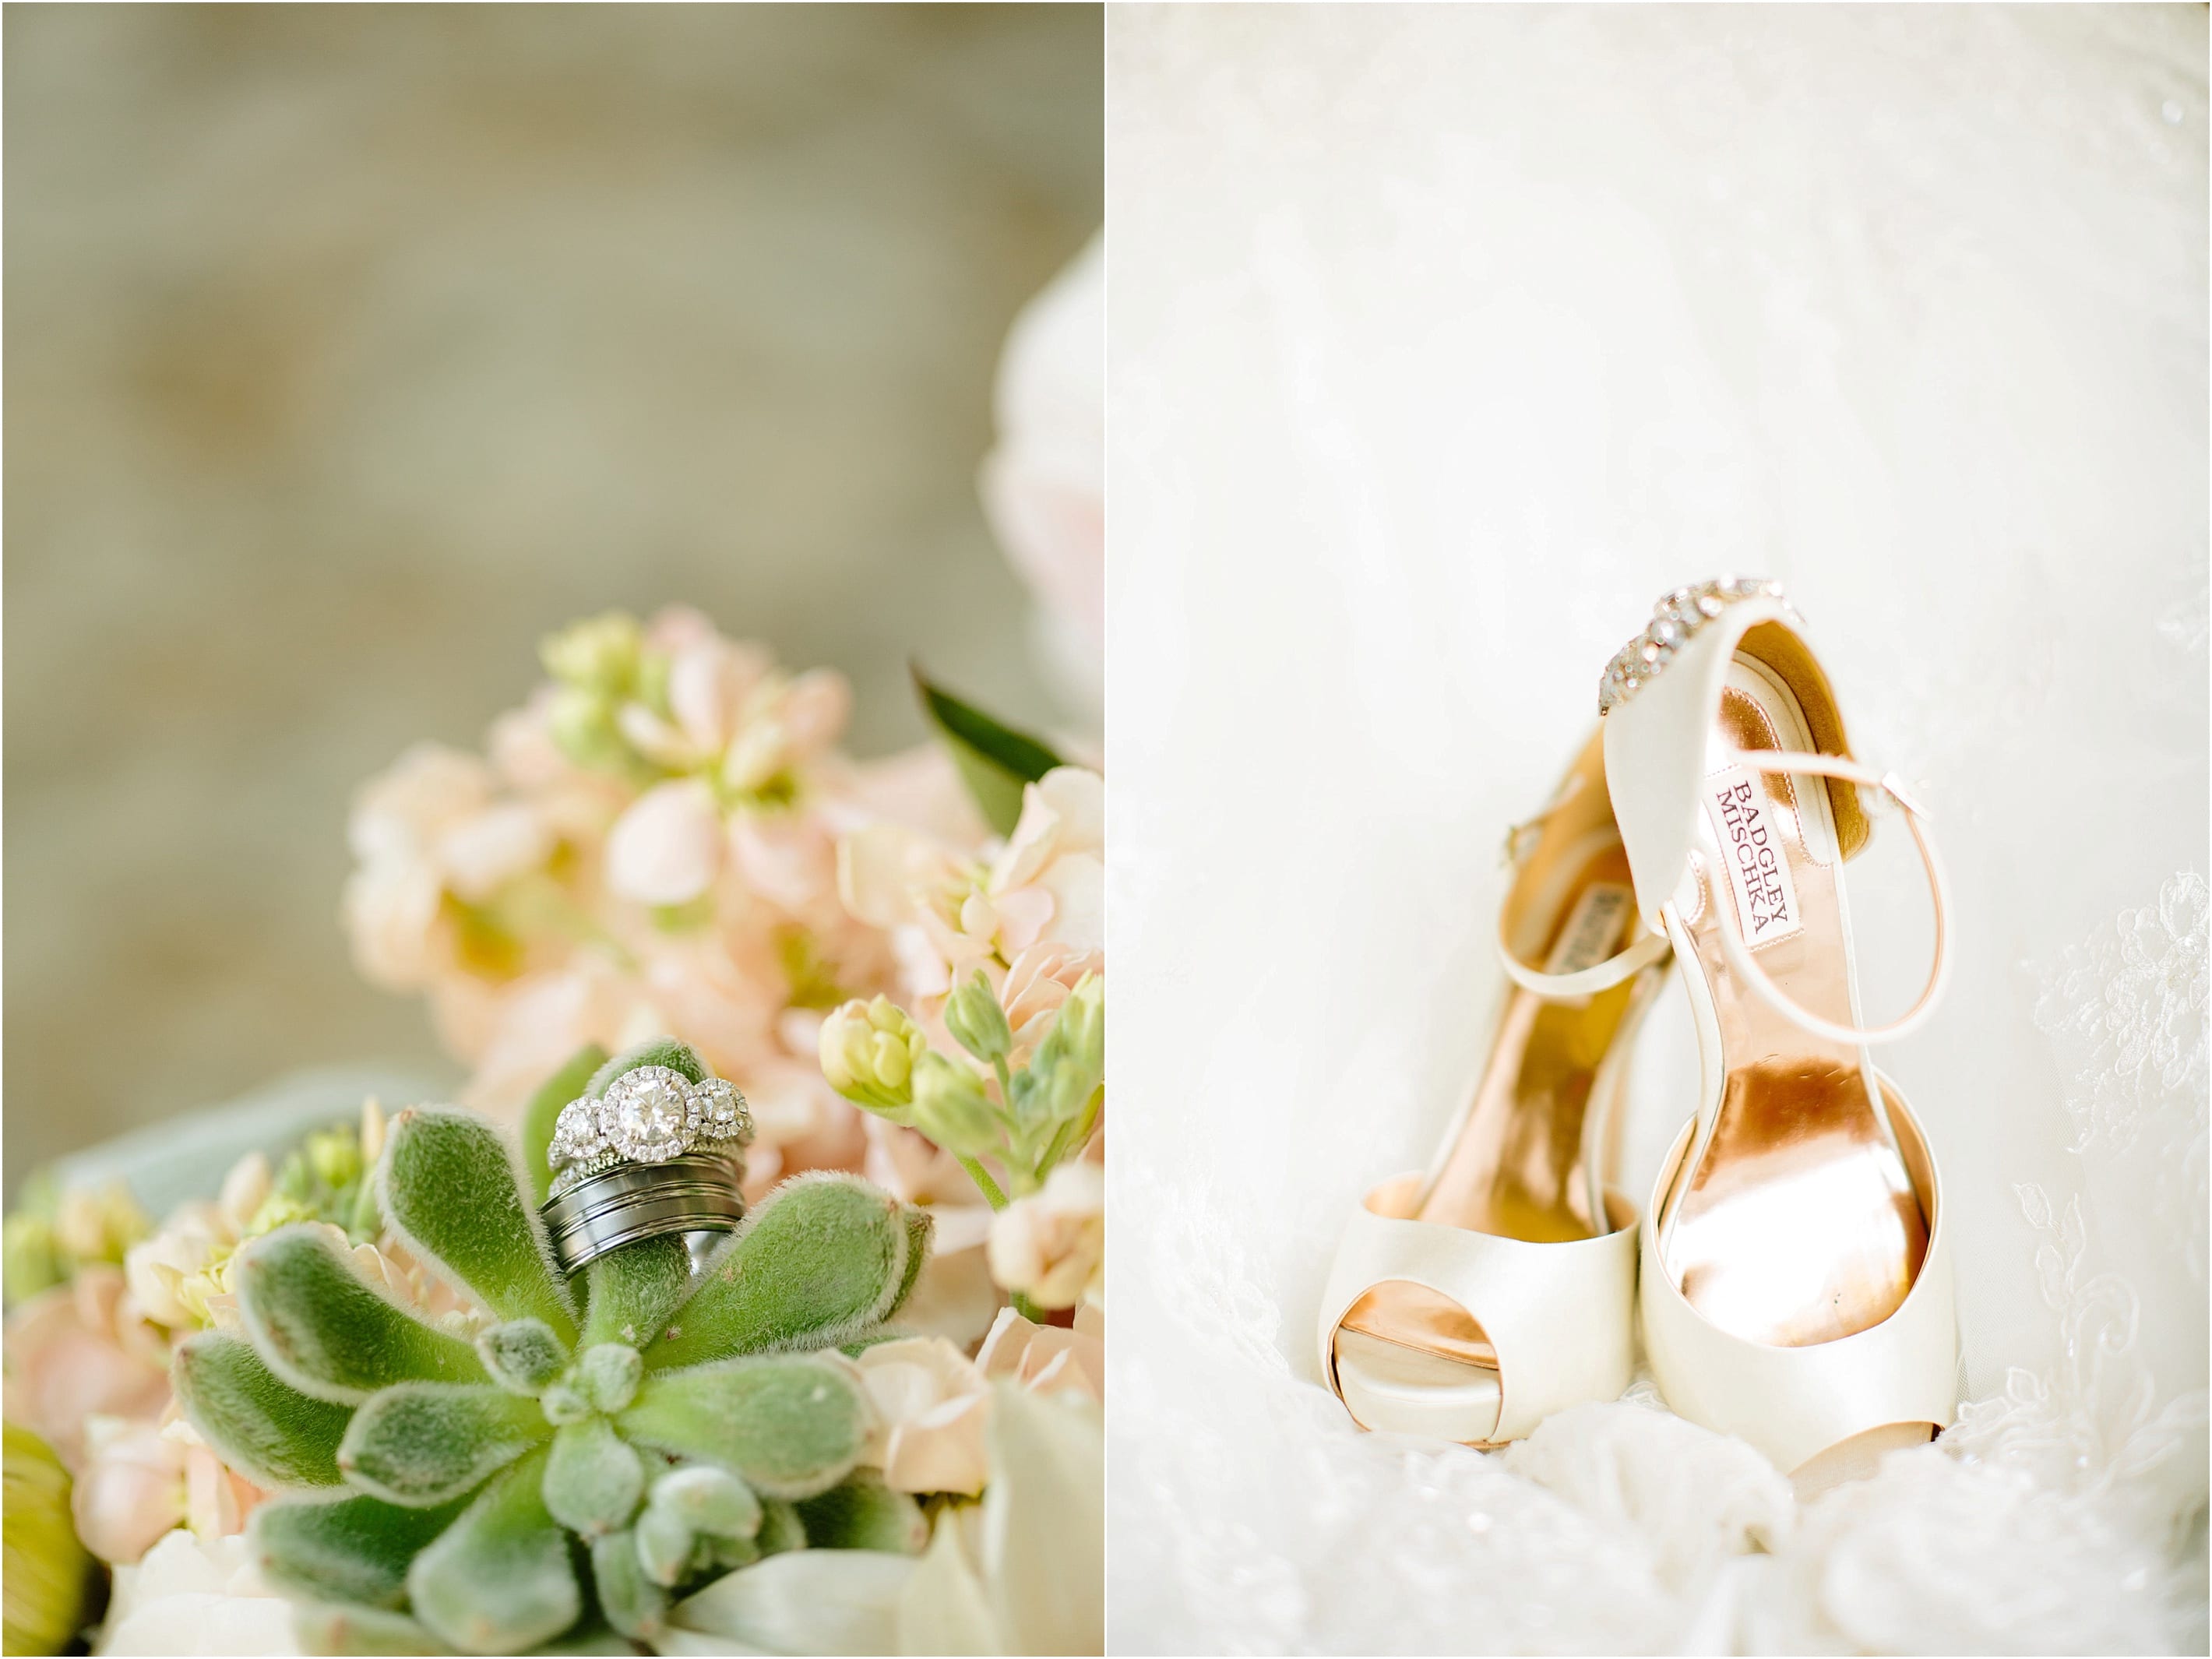 View More: http://tuckerimages.pass.us/baxterwedding